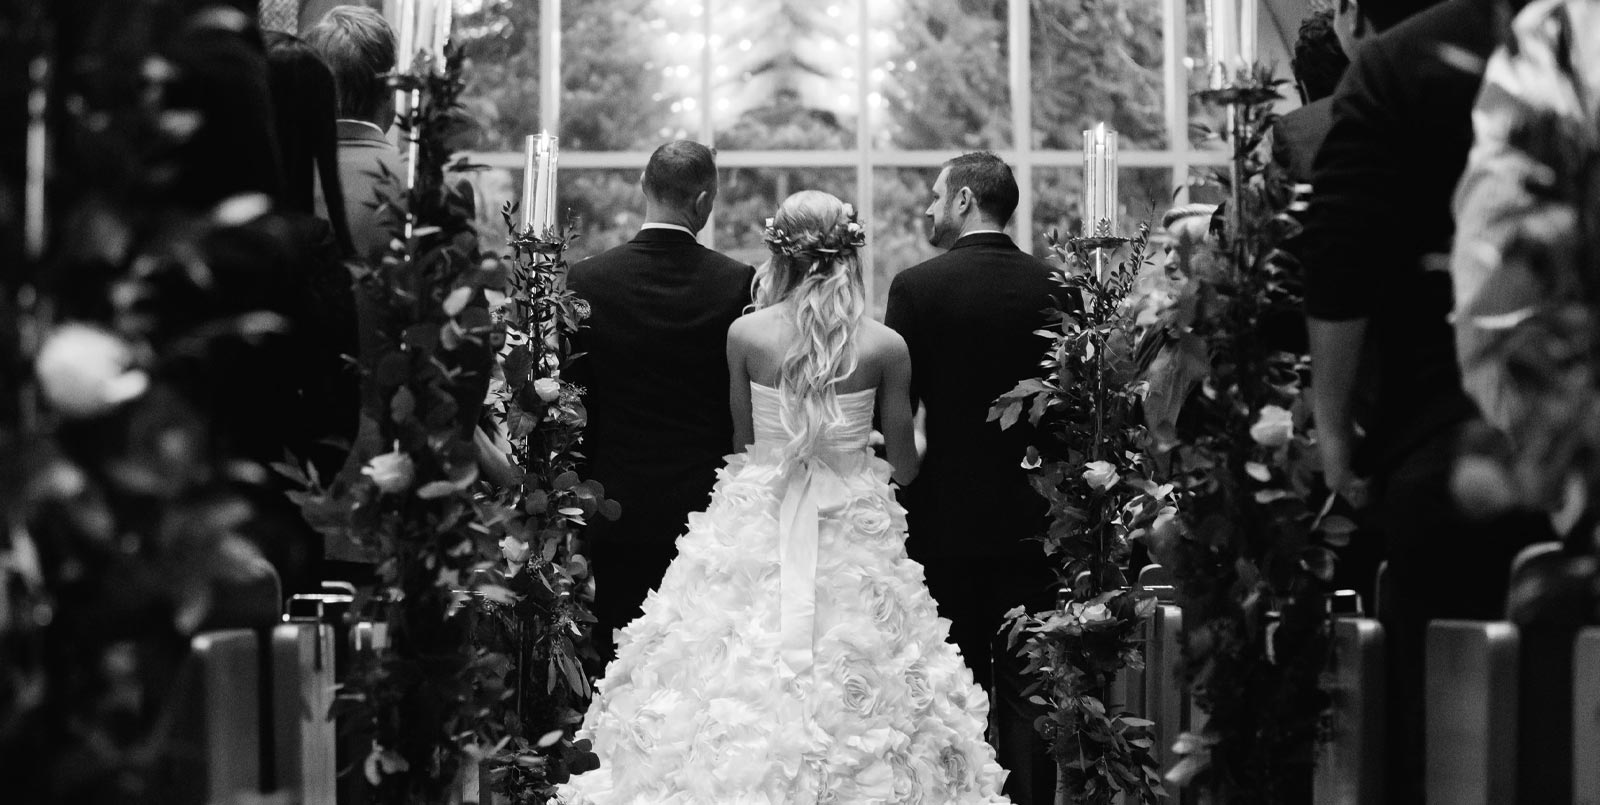 A bride standing between two men | Lisa Dupar Catering | Wedding & Event Catering in Seattle